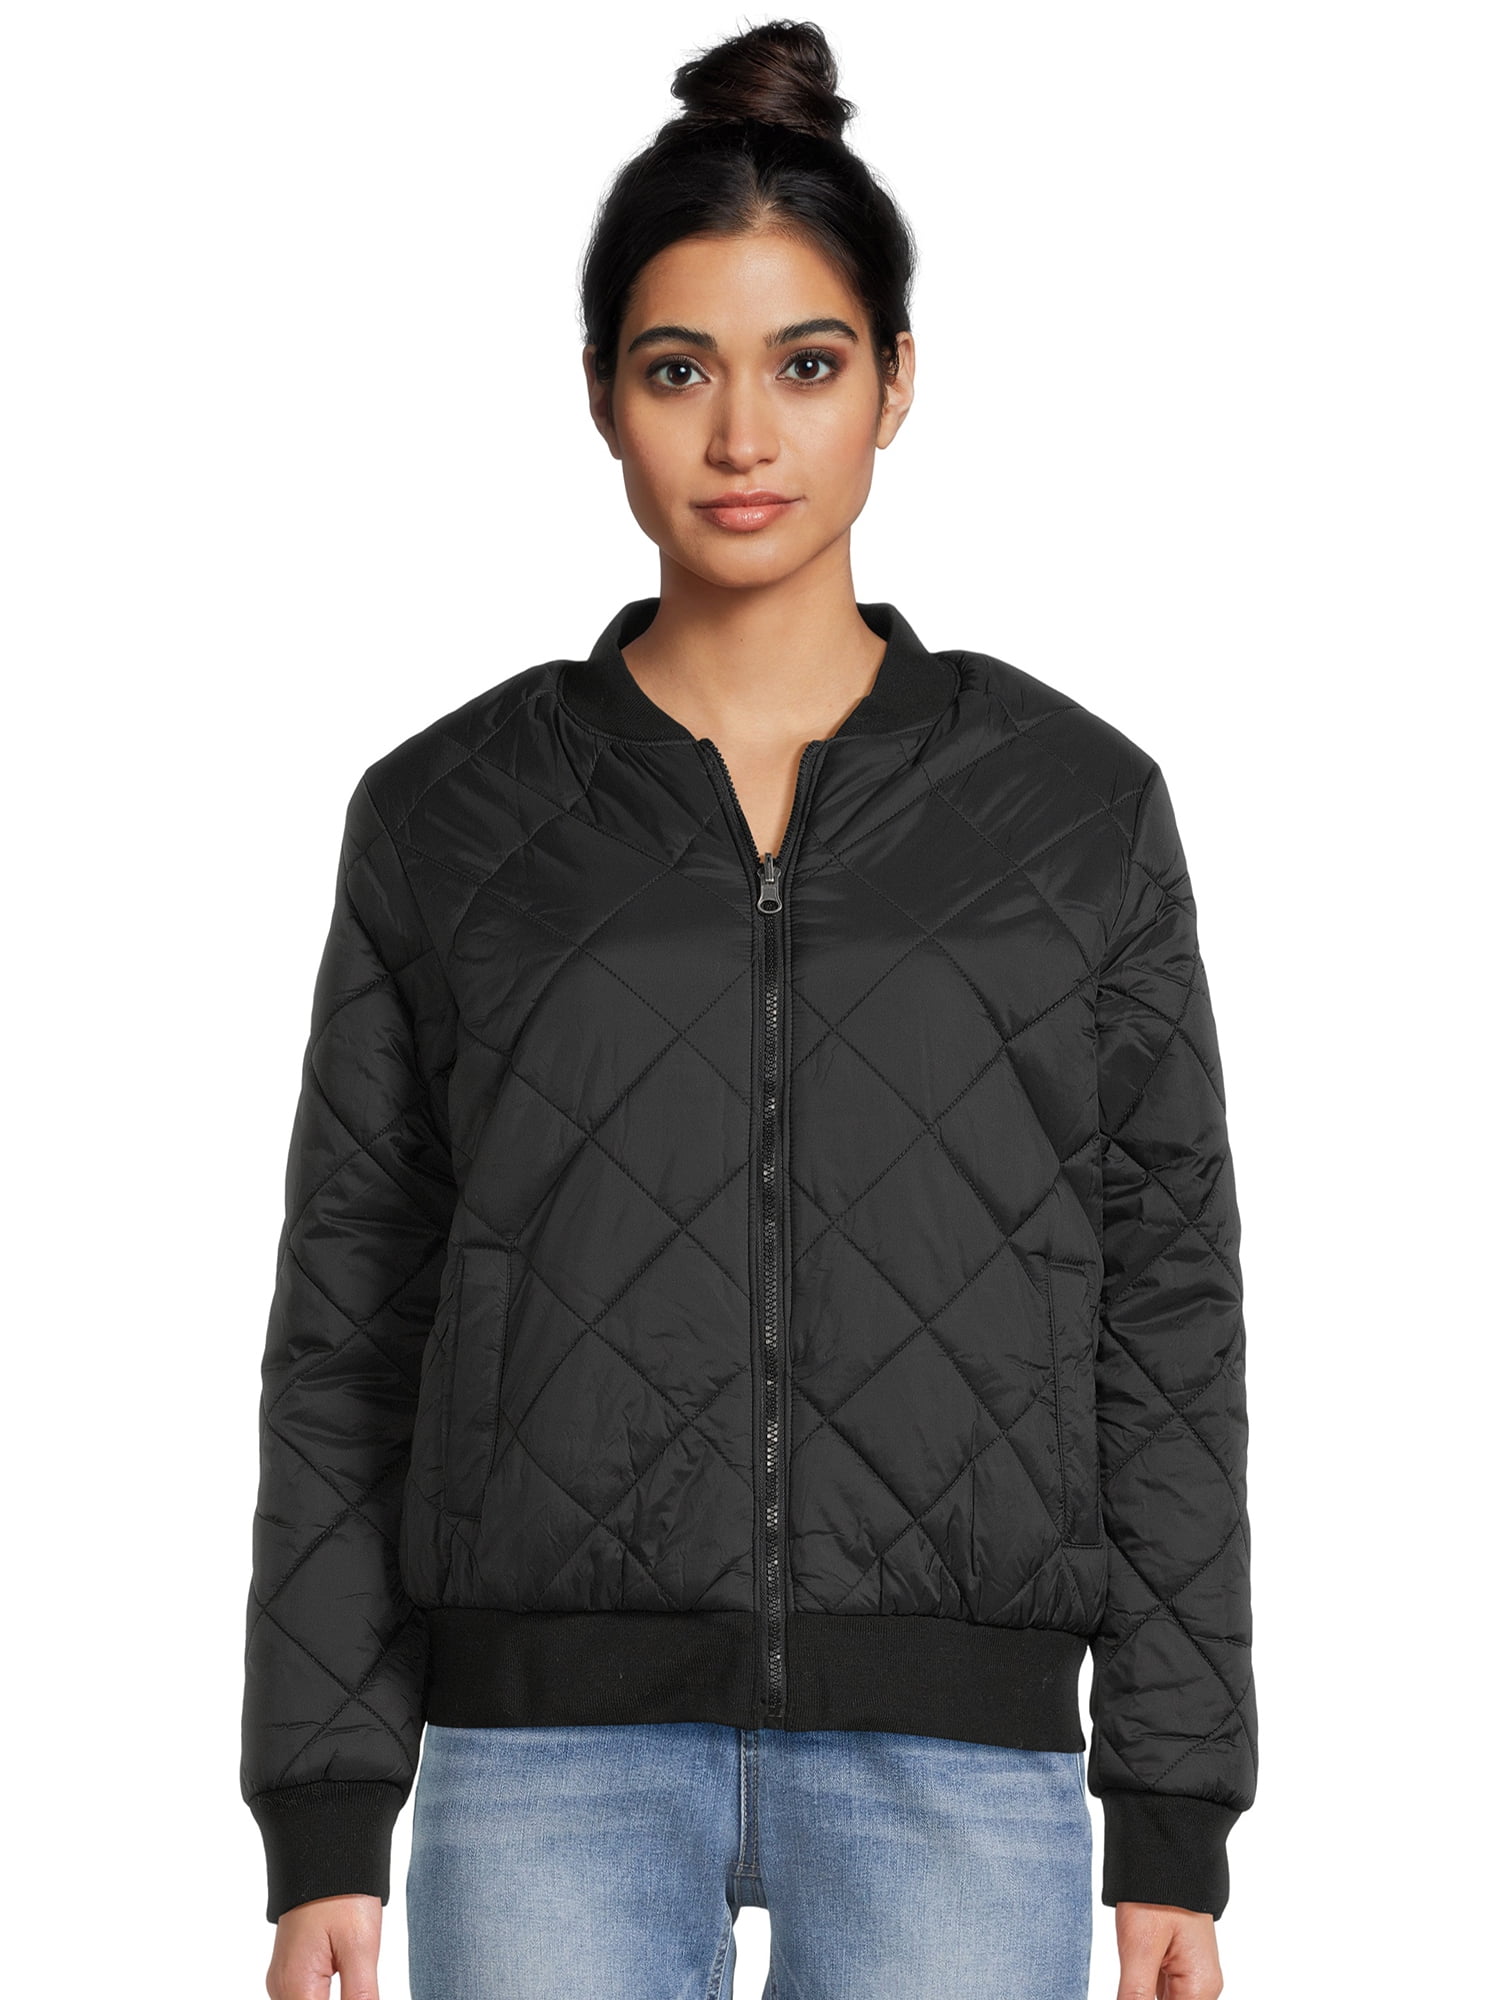 Alyned Together Women's Quilted Reversible Bomber Jacket, Sizes S-3X ...